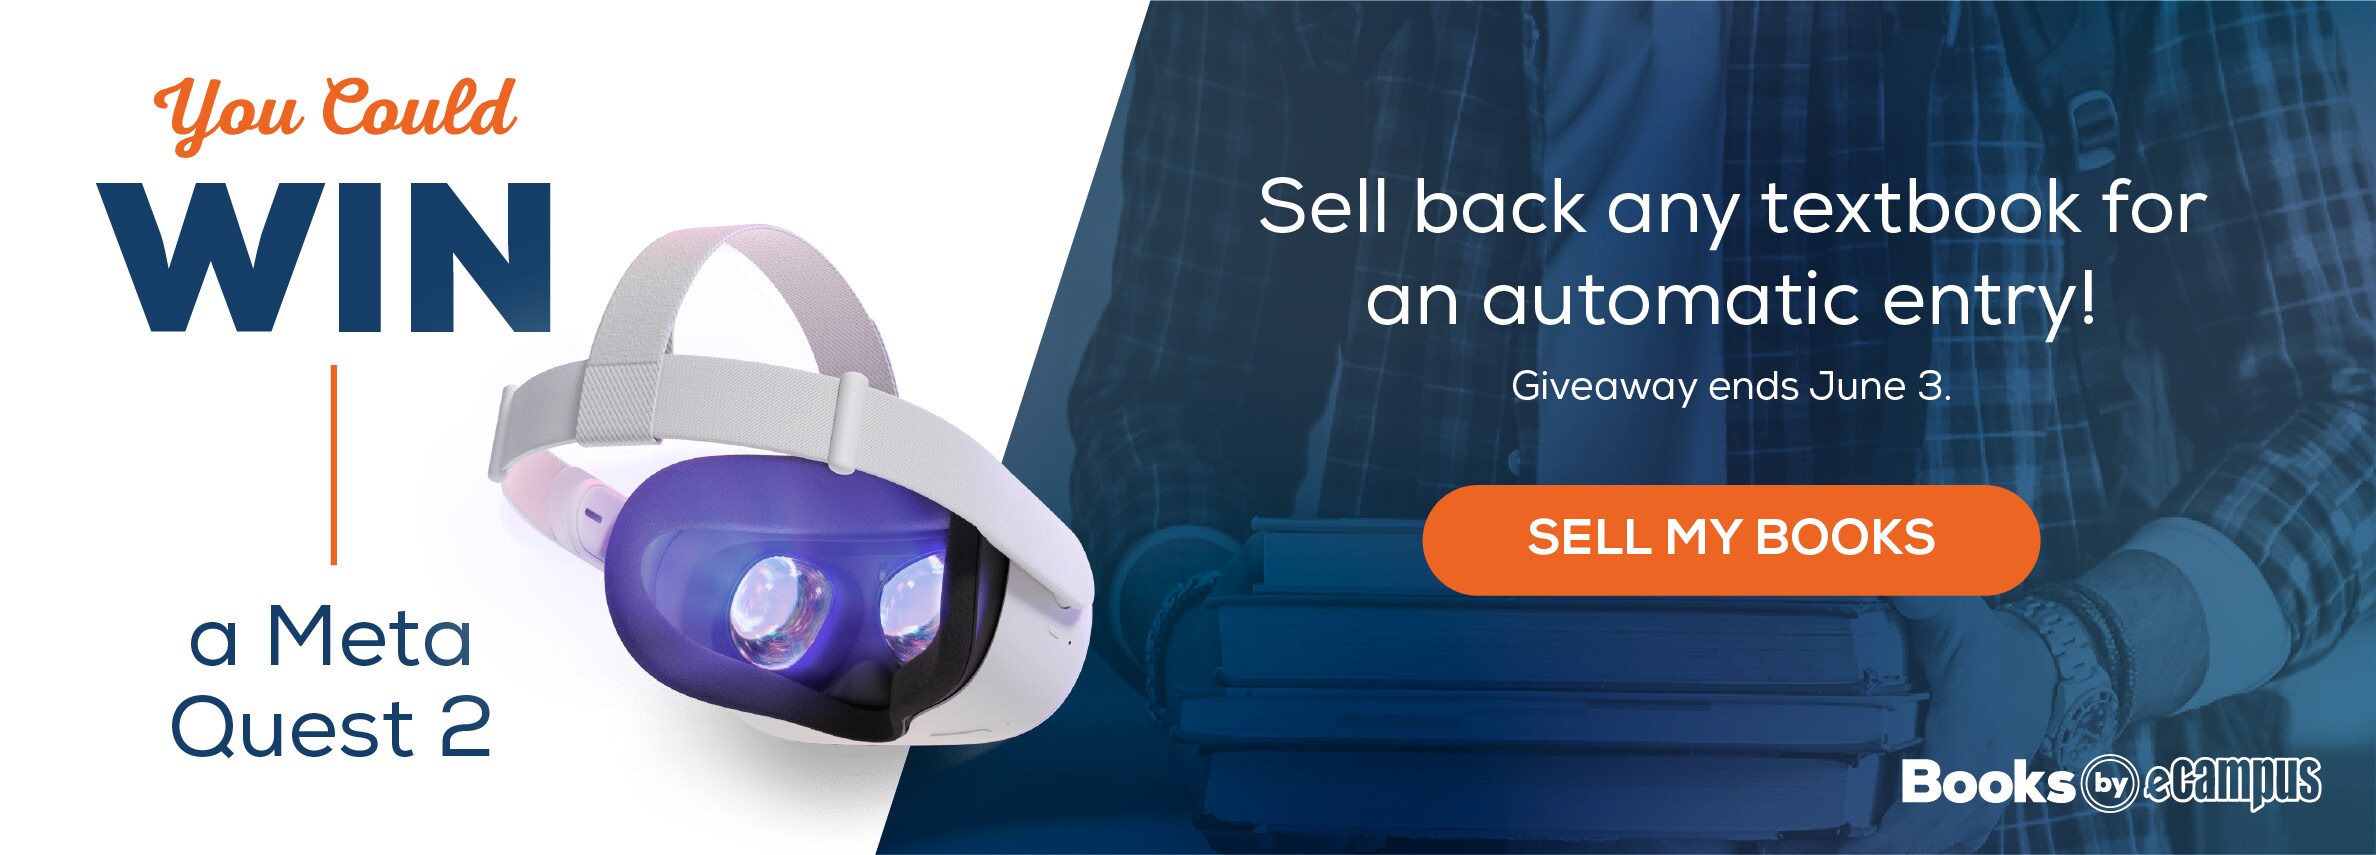 You could win a Meta Quest 2. Sell back any textbook for an automatic entry! Giveaway ends June 3. Click to sell your books.